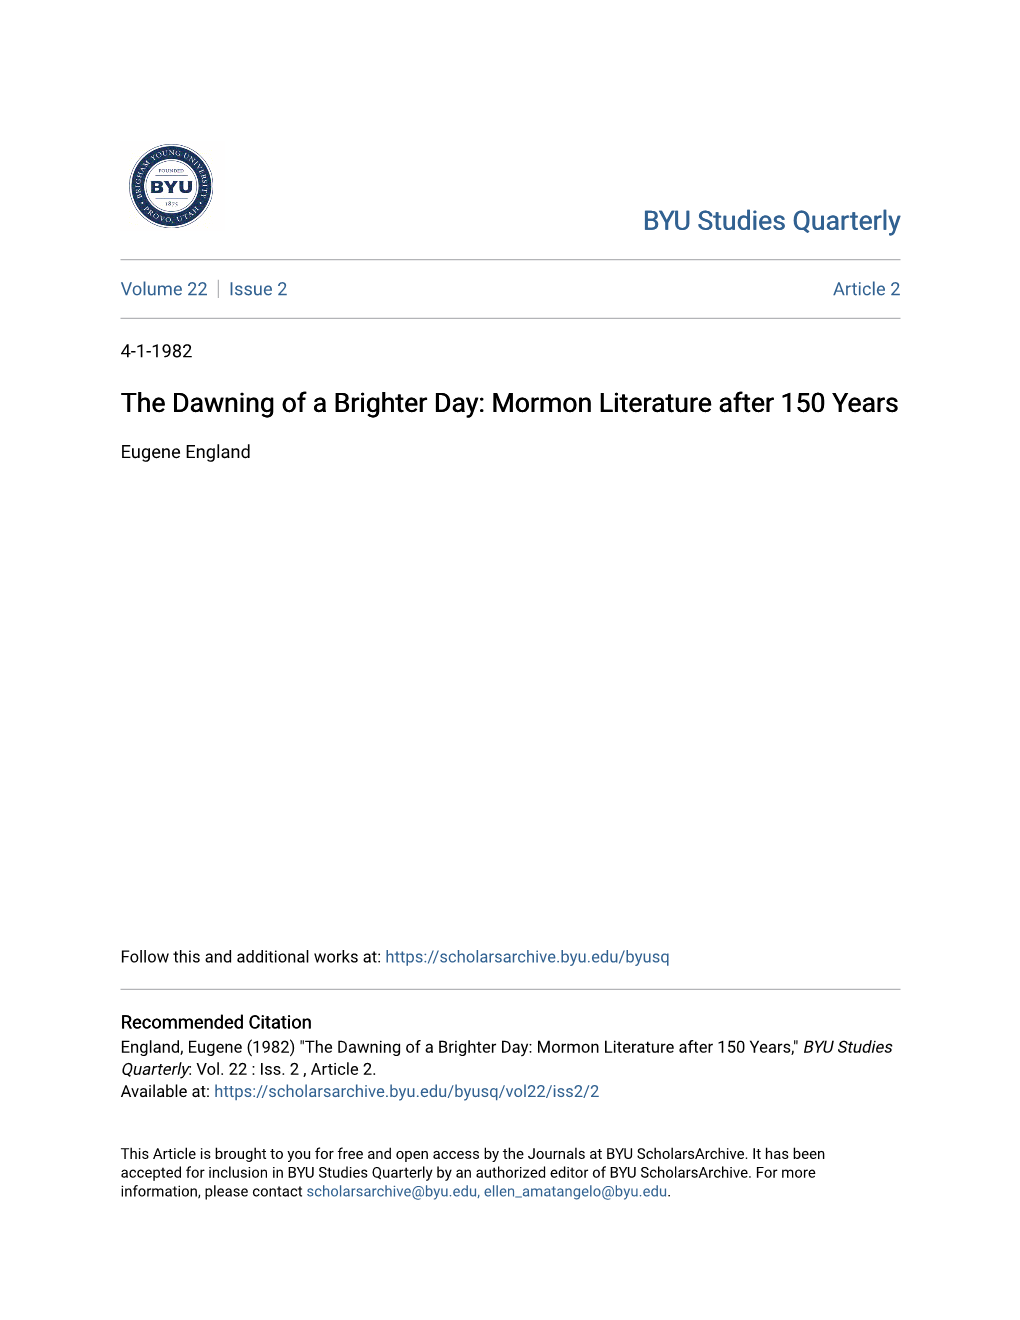 The Dawning of a Brighter Day: Mormon Literature After 150 Years